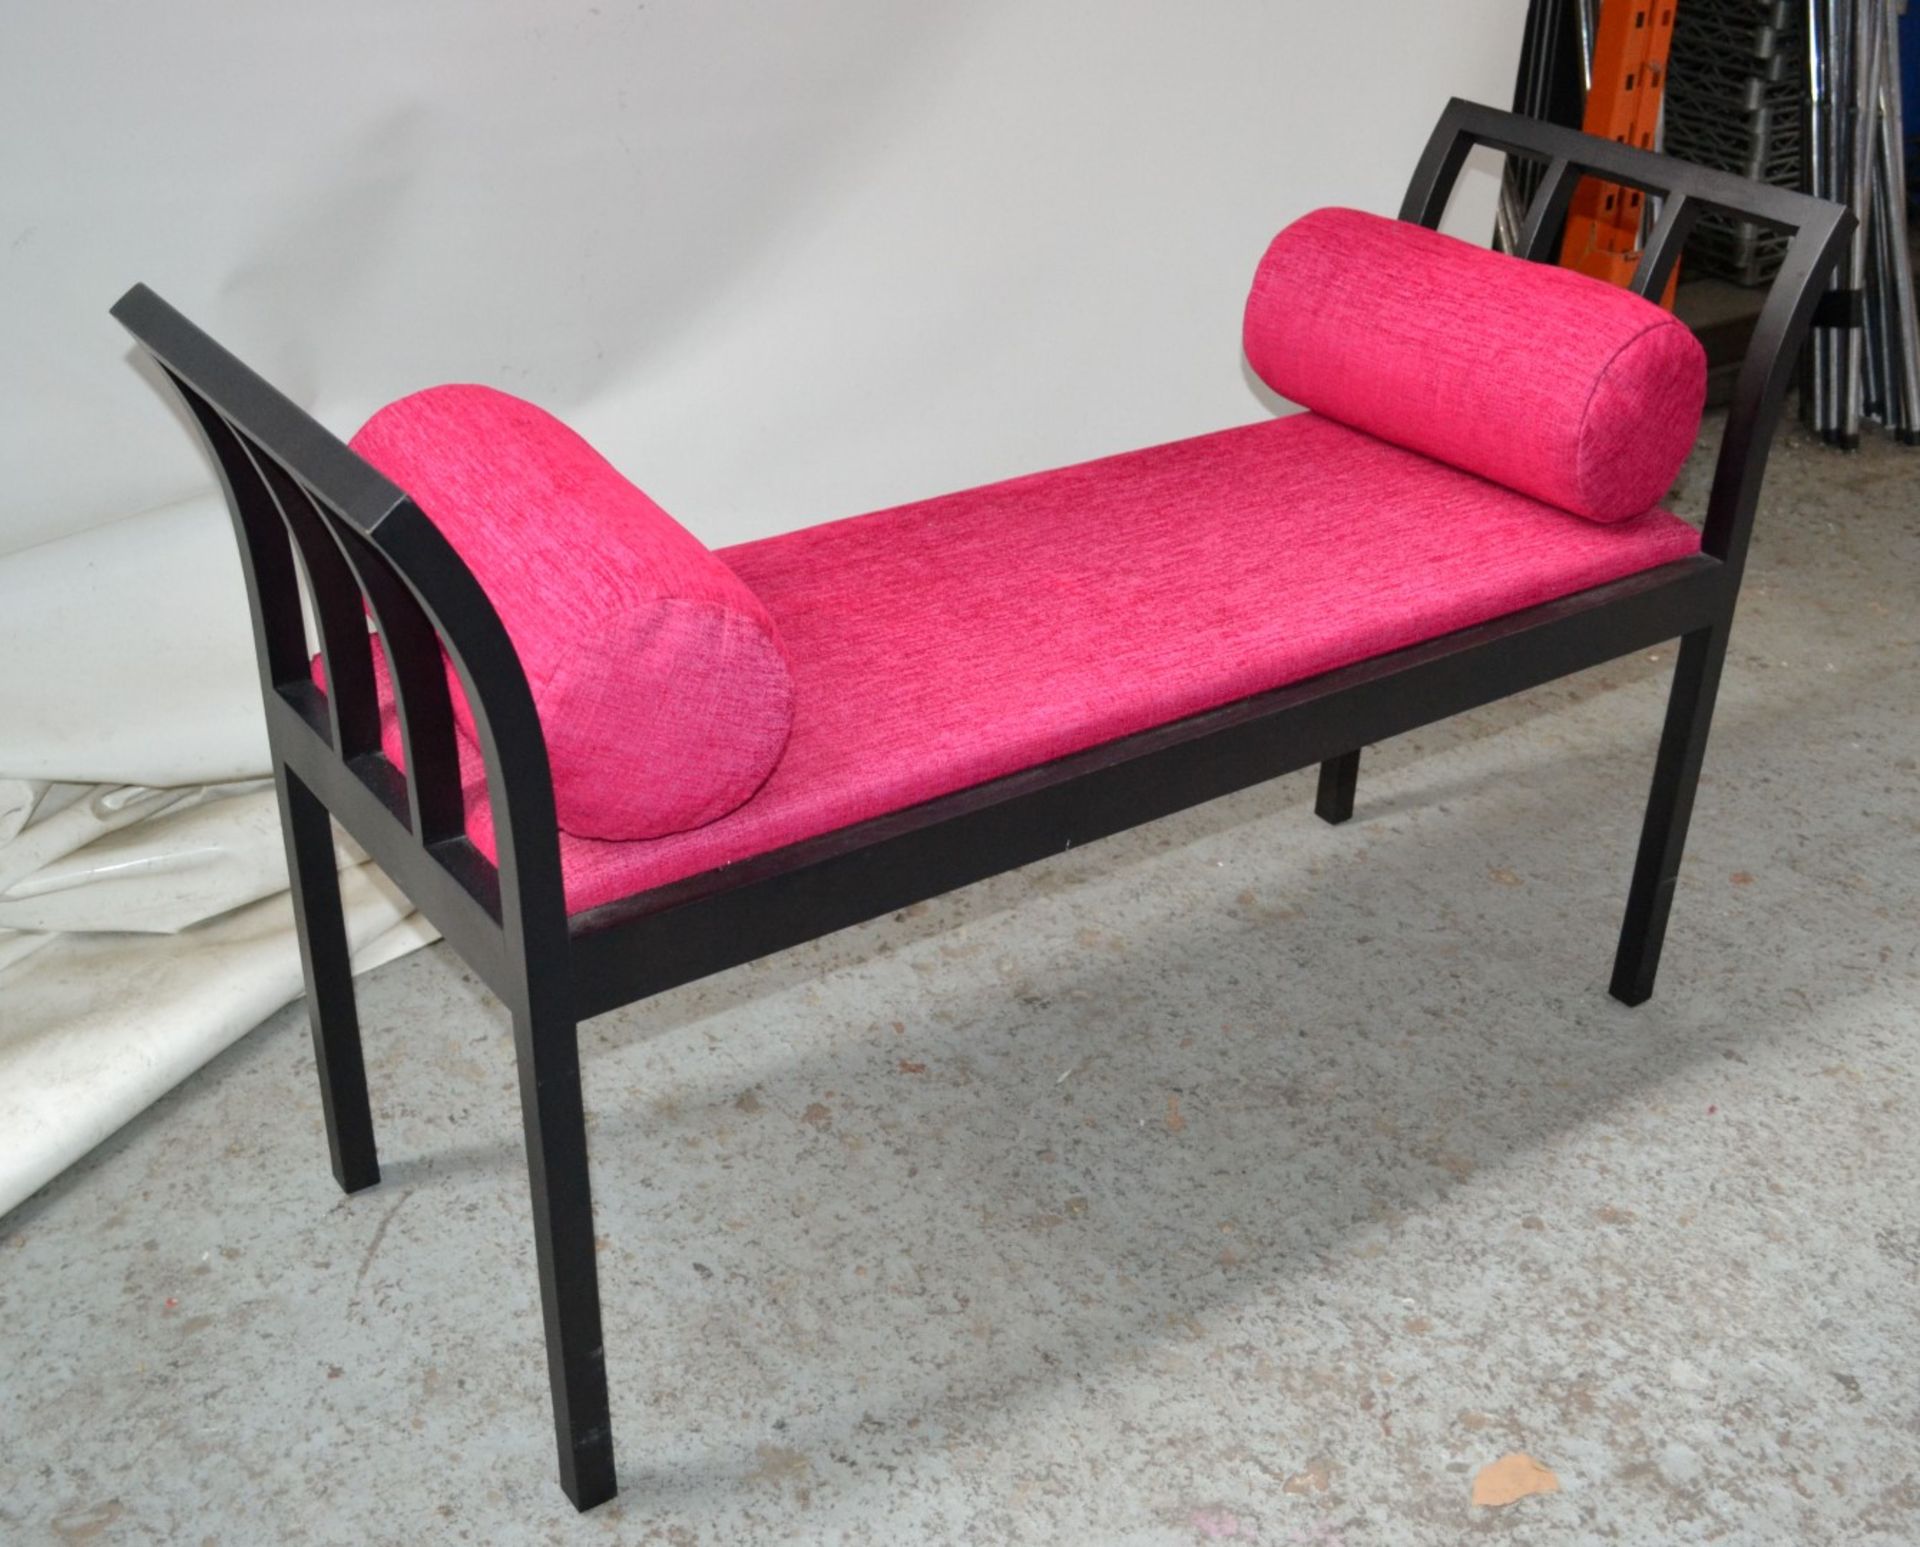 1 x Magenta Upholstered Bedroom Bench with 2 Cushions - CL314 - Location: Altrincham WA14 - *NO VAT - Image 3 of 11